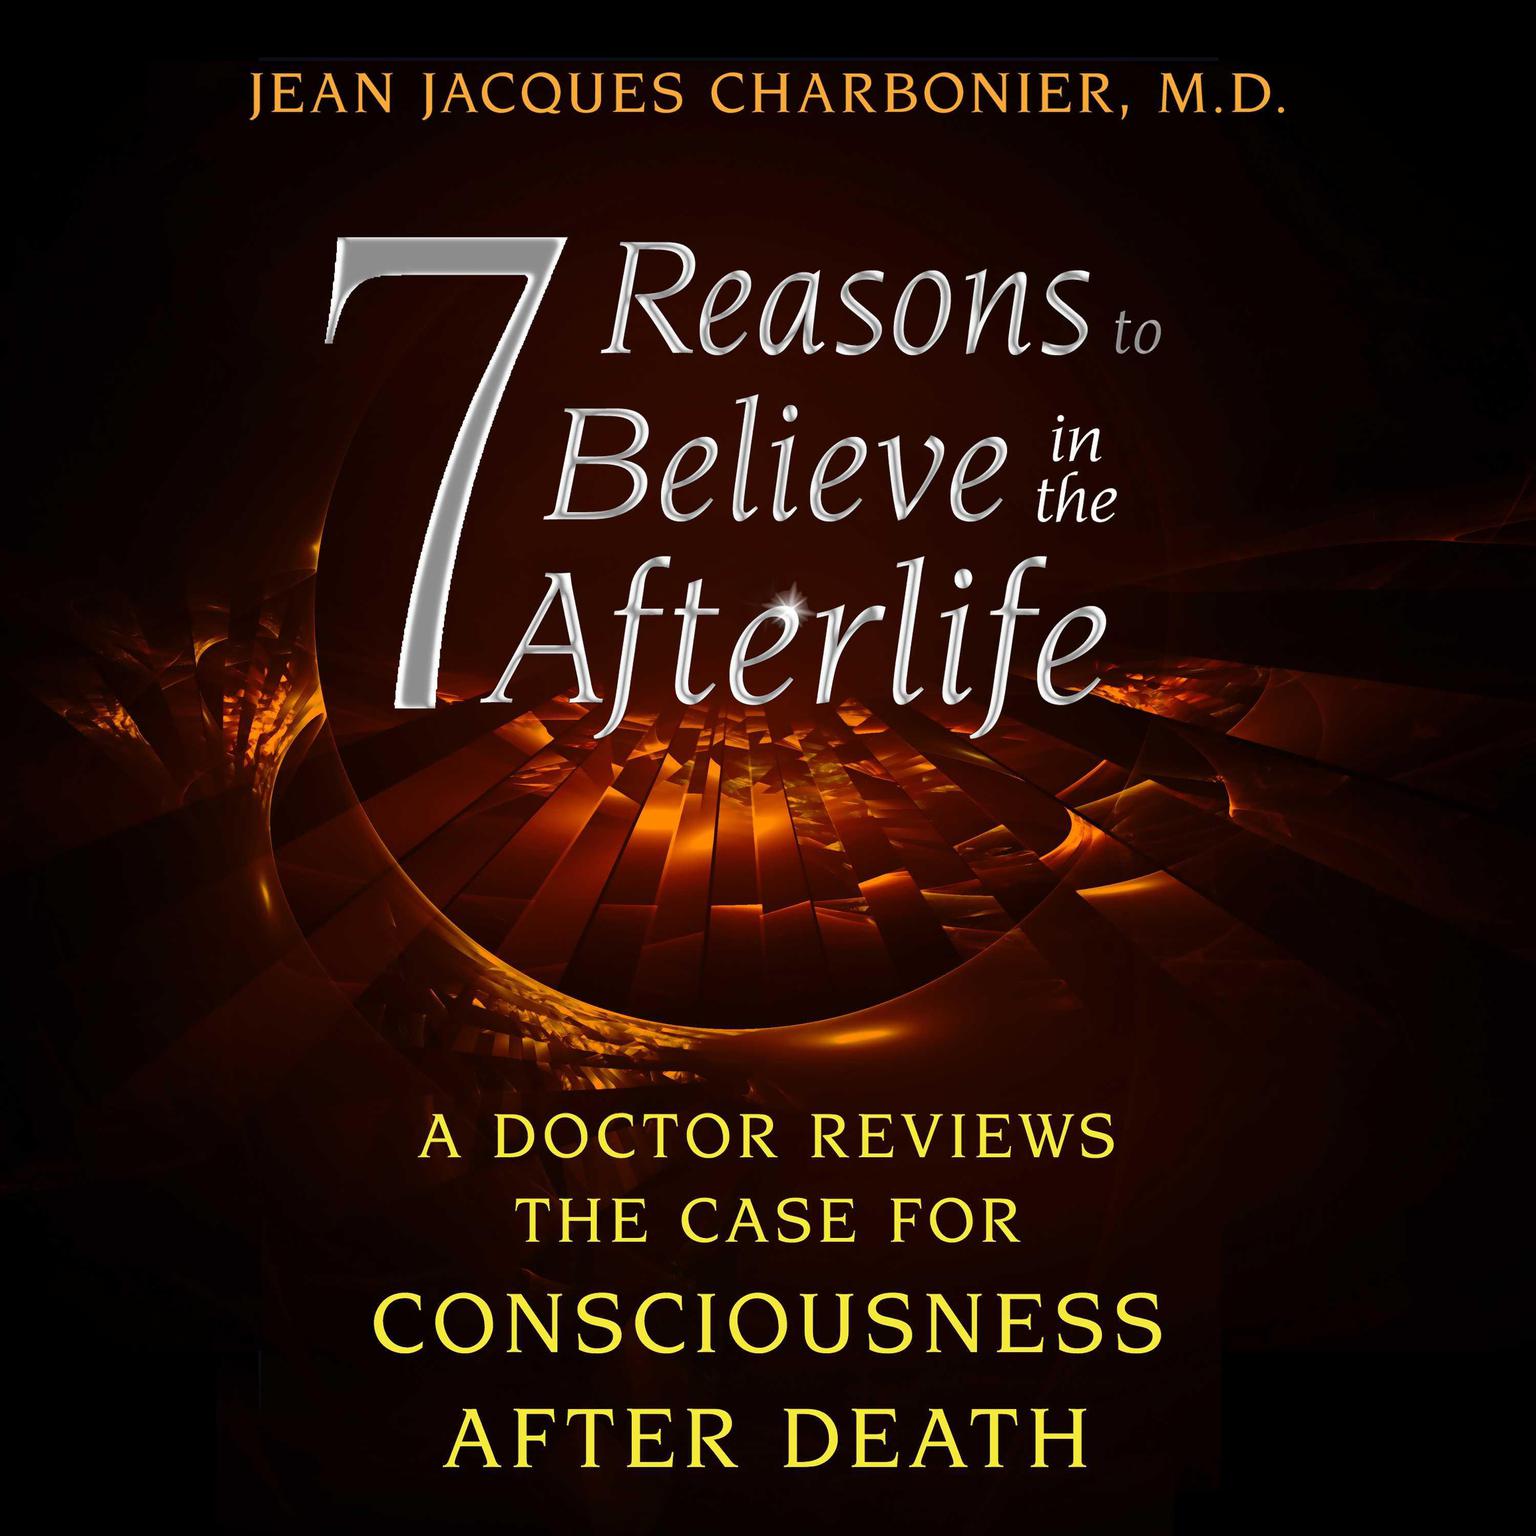 7 Reasons to Believe in the Afterlife: A Doctor Reviews the Case for Consciousness after Death Audiobook, by Jean Jacques Charbonier